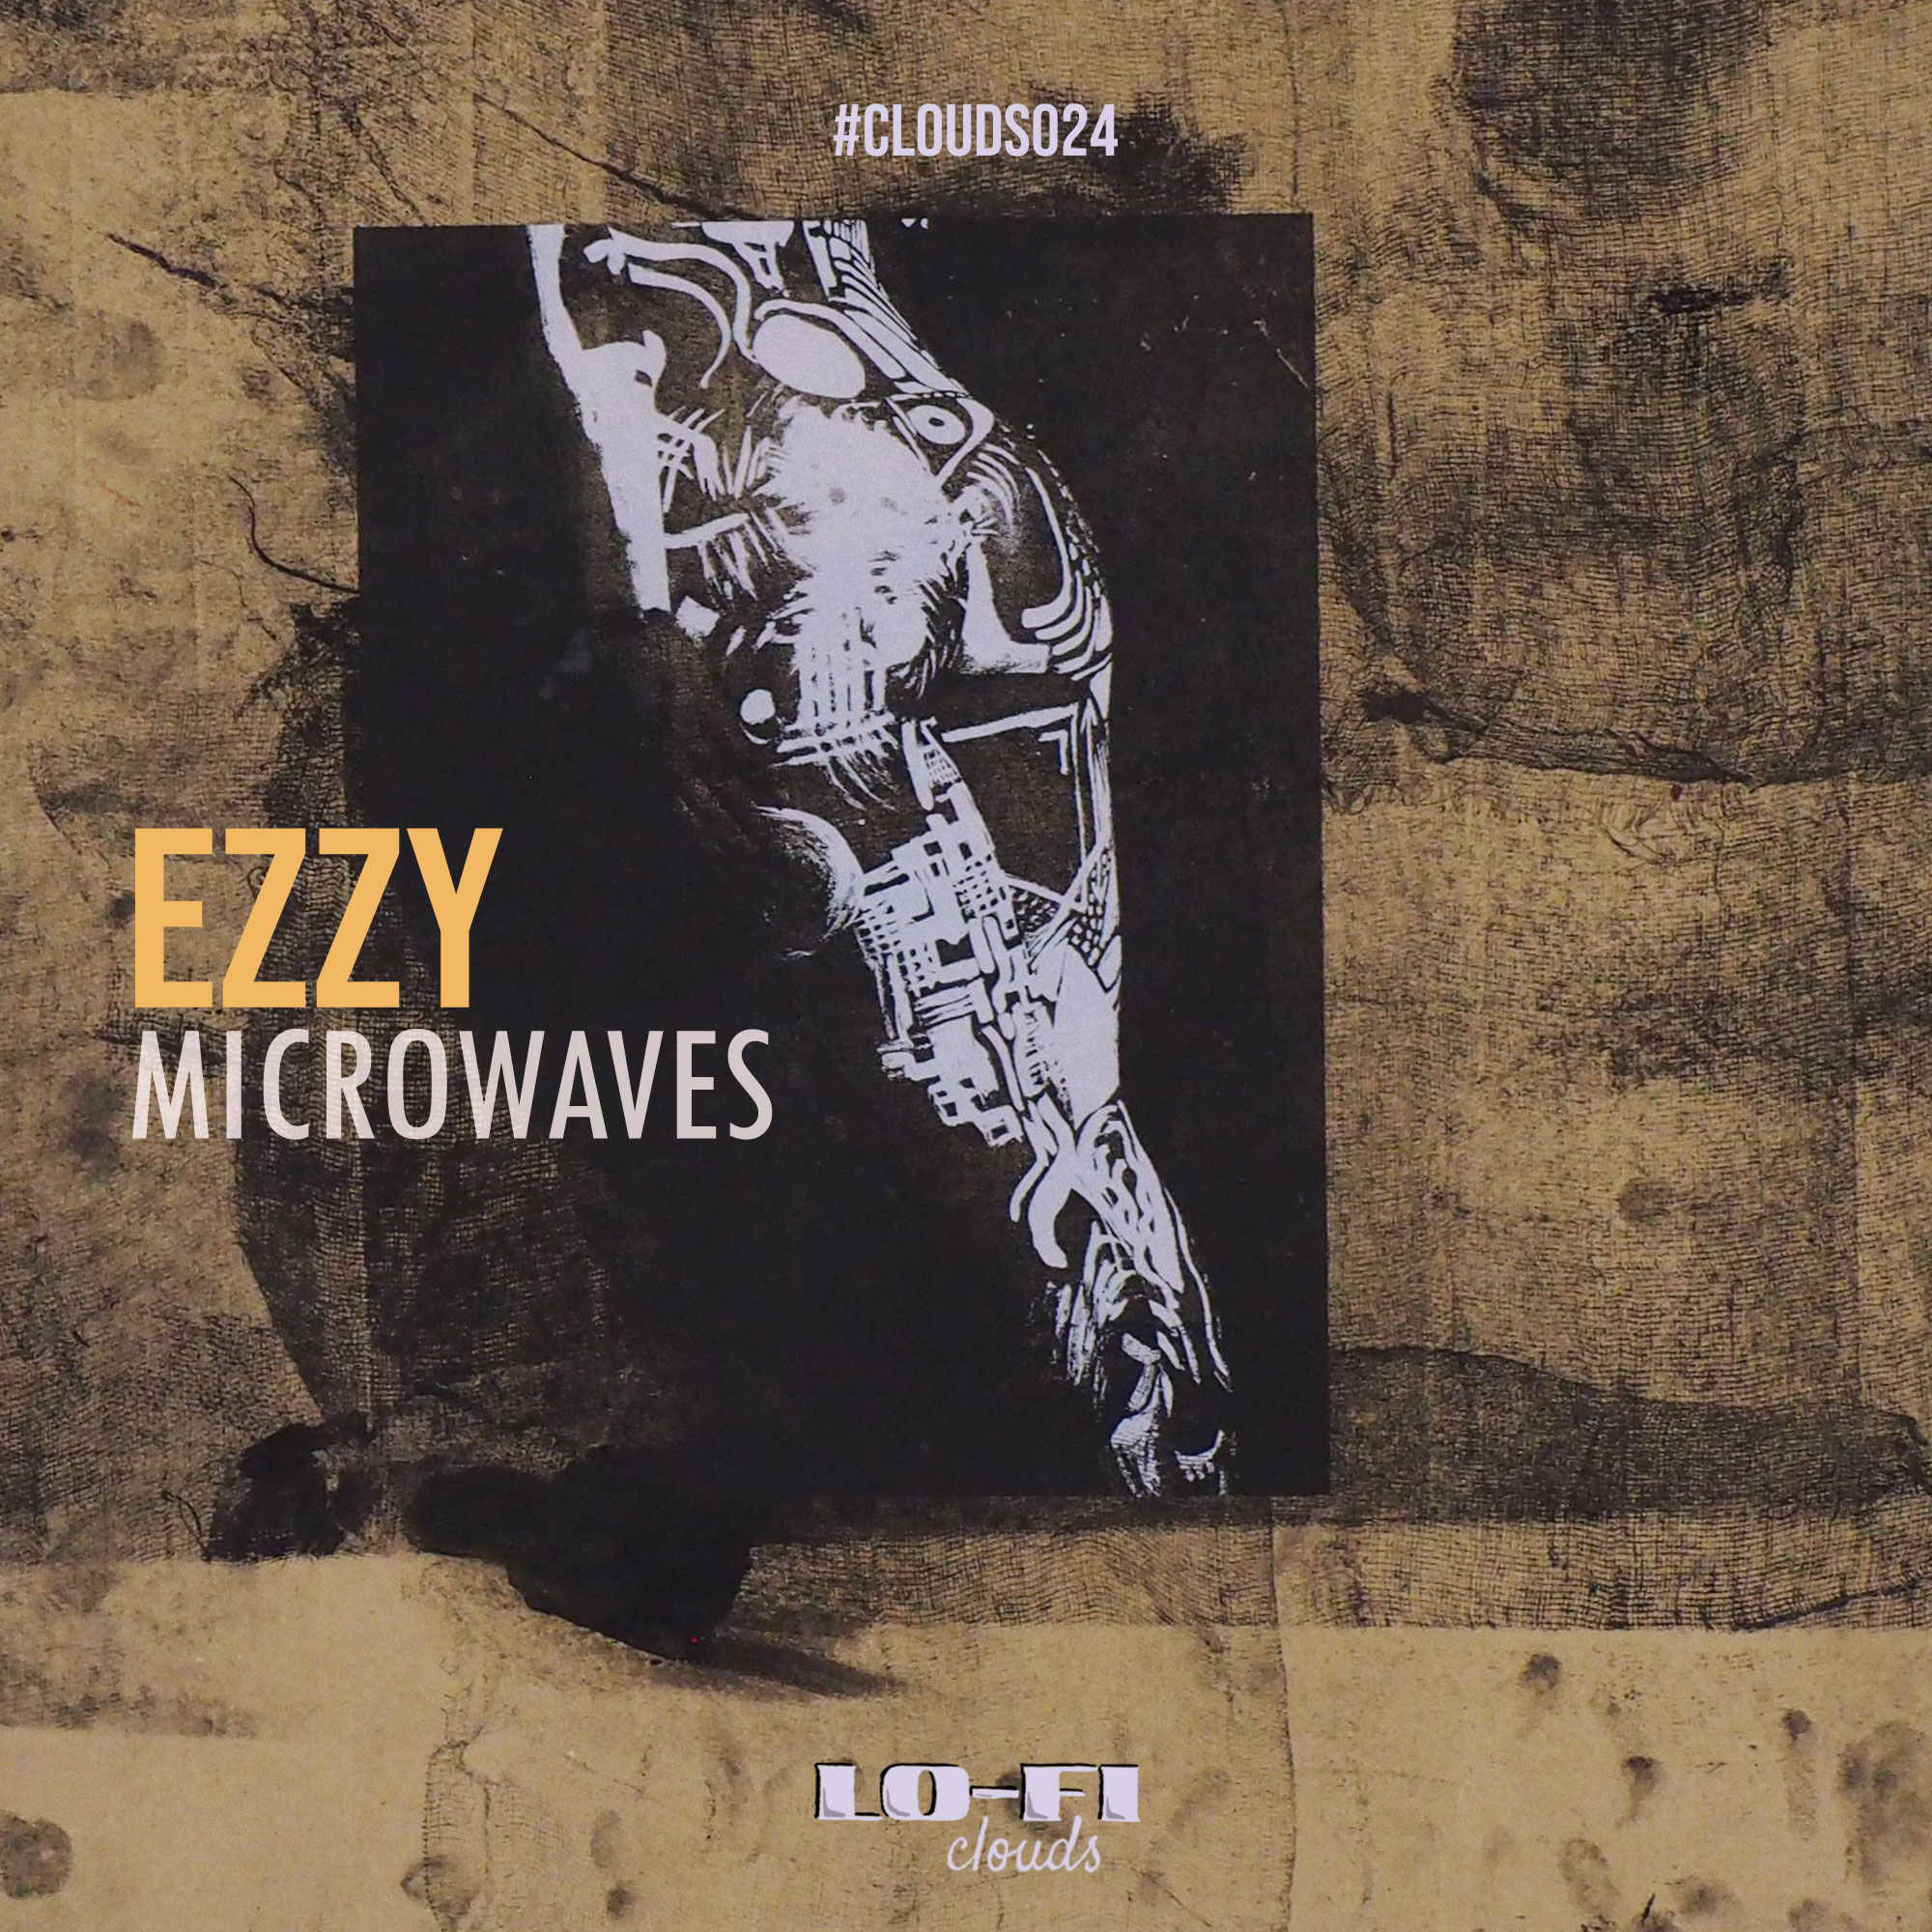 Ezzy - Microwaves (CLOUDS023) coverart